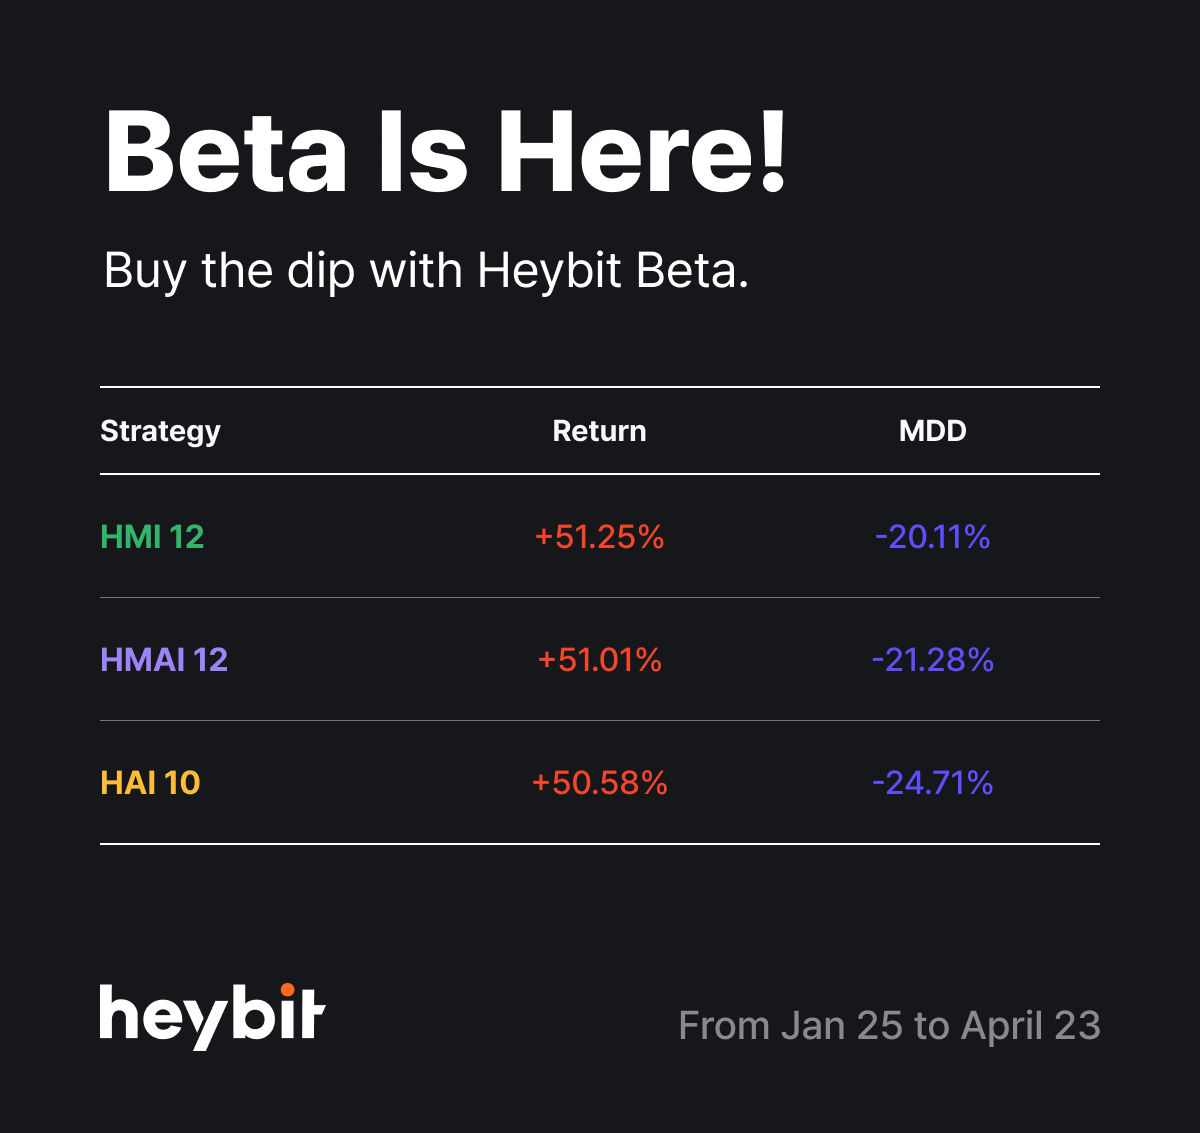 🚀Make sure what’s going around in the market now and carefully think about the right timing for “buy-the-dip” using the Heybit Beta strategy as we wait for the possible upcoming bull market rally! 🎉Bitcoin halving Completed🎉 🔍 Crypto News $BTC ☀️ Standard Chartered